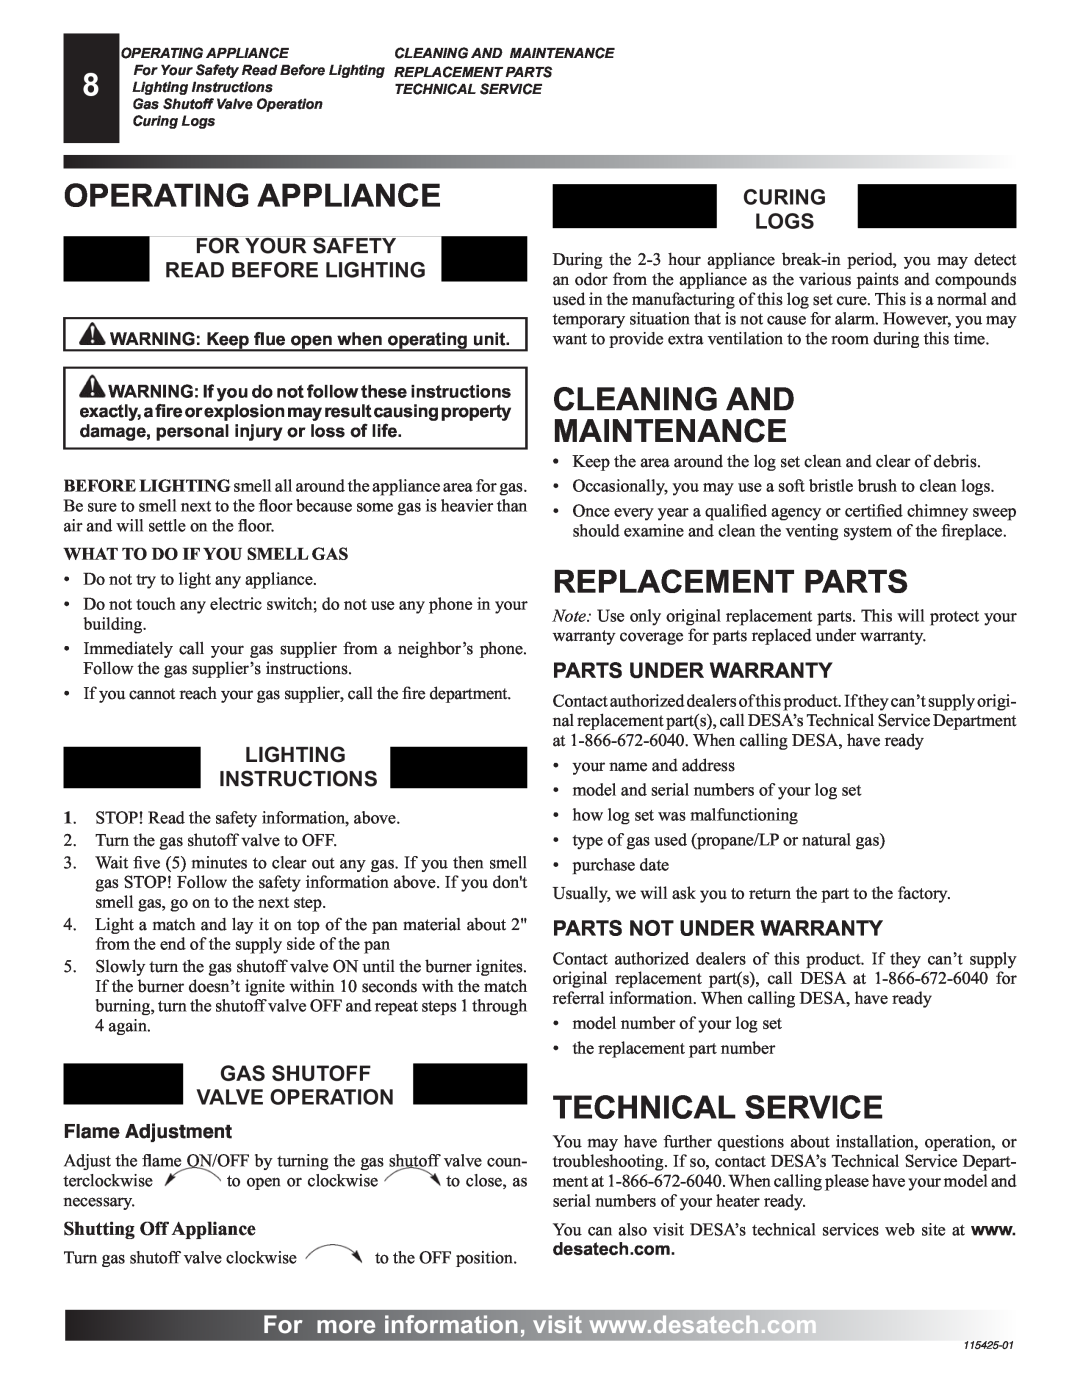 Desa PHK-18, PHK-24, PHK-30 Operating Appliance, Cleaning And Maintenance, Replacement Parts, Technical Service 